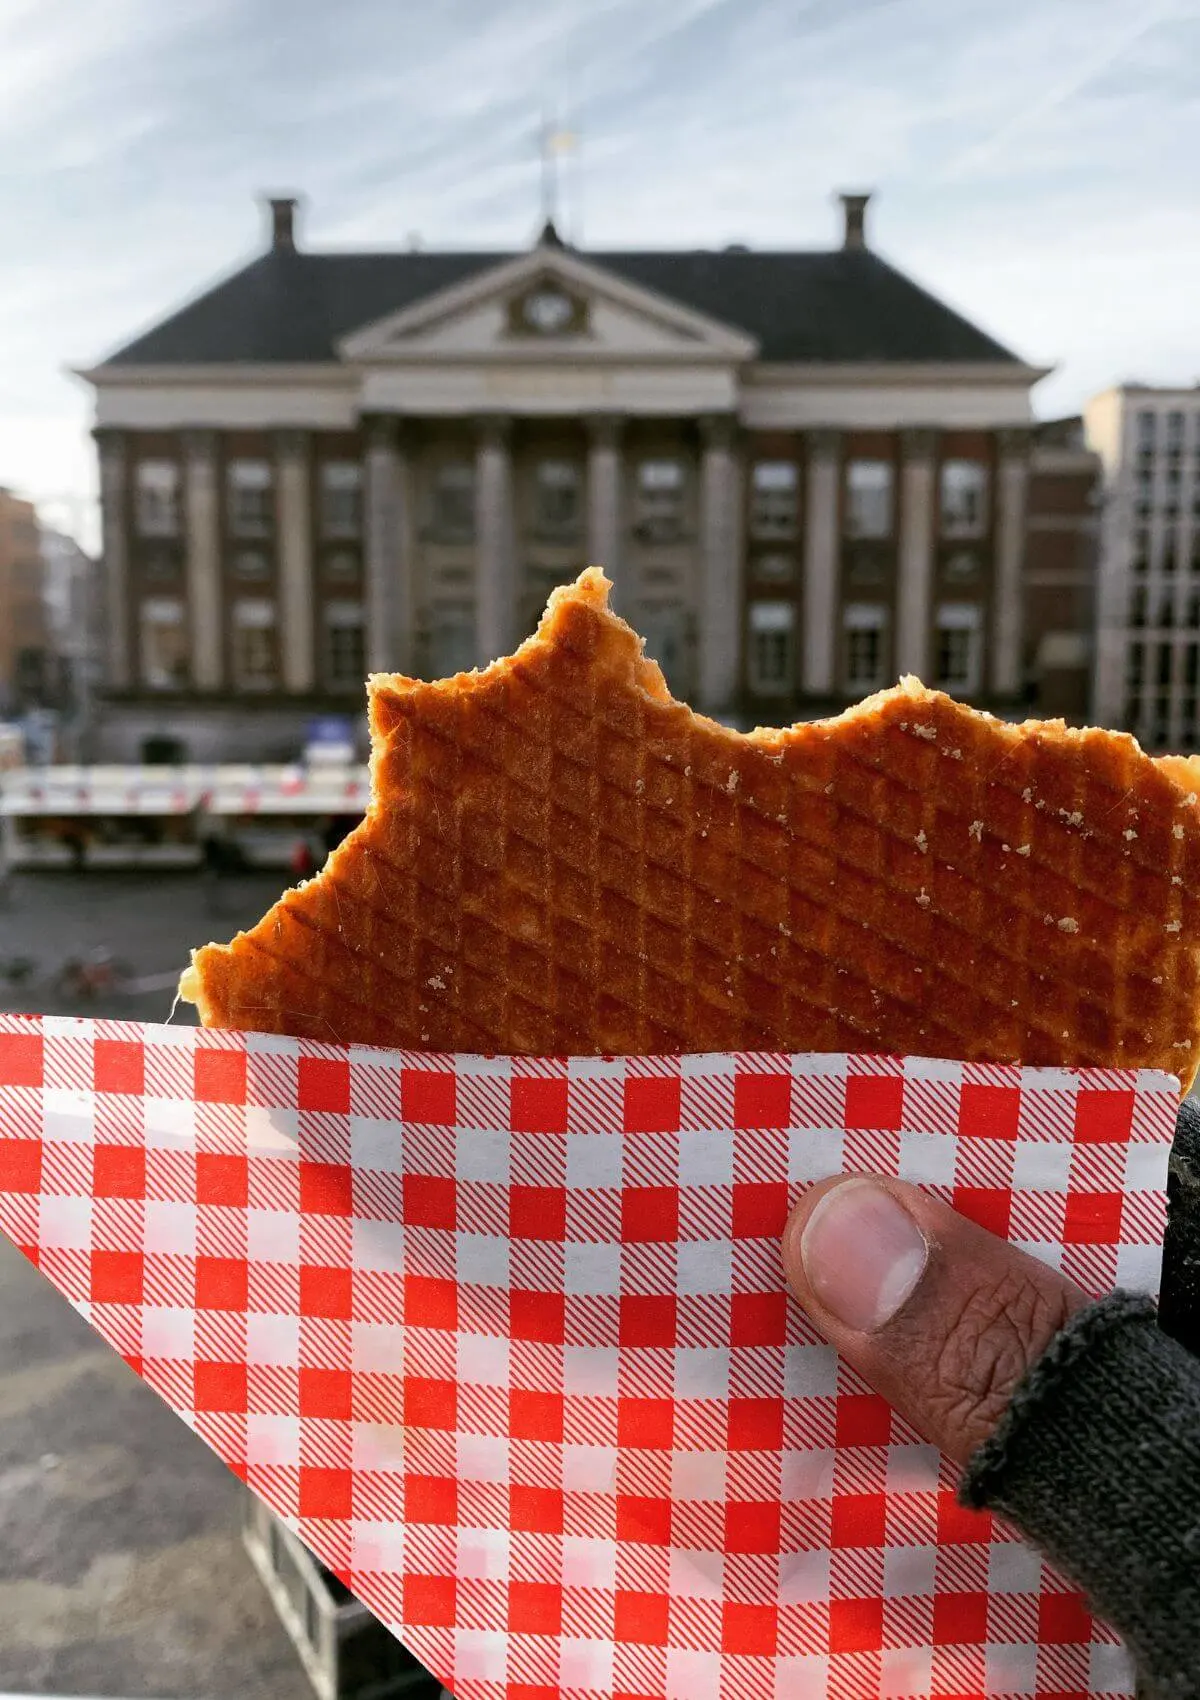 Stroopwafels are sweet treats of souvenirs from Amsterdam